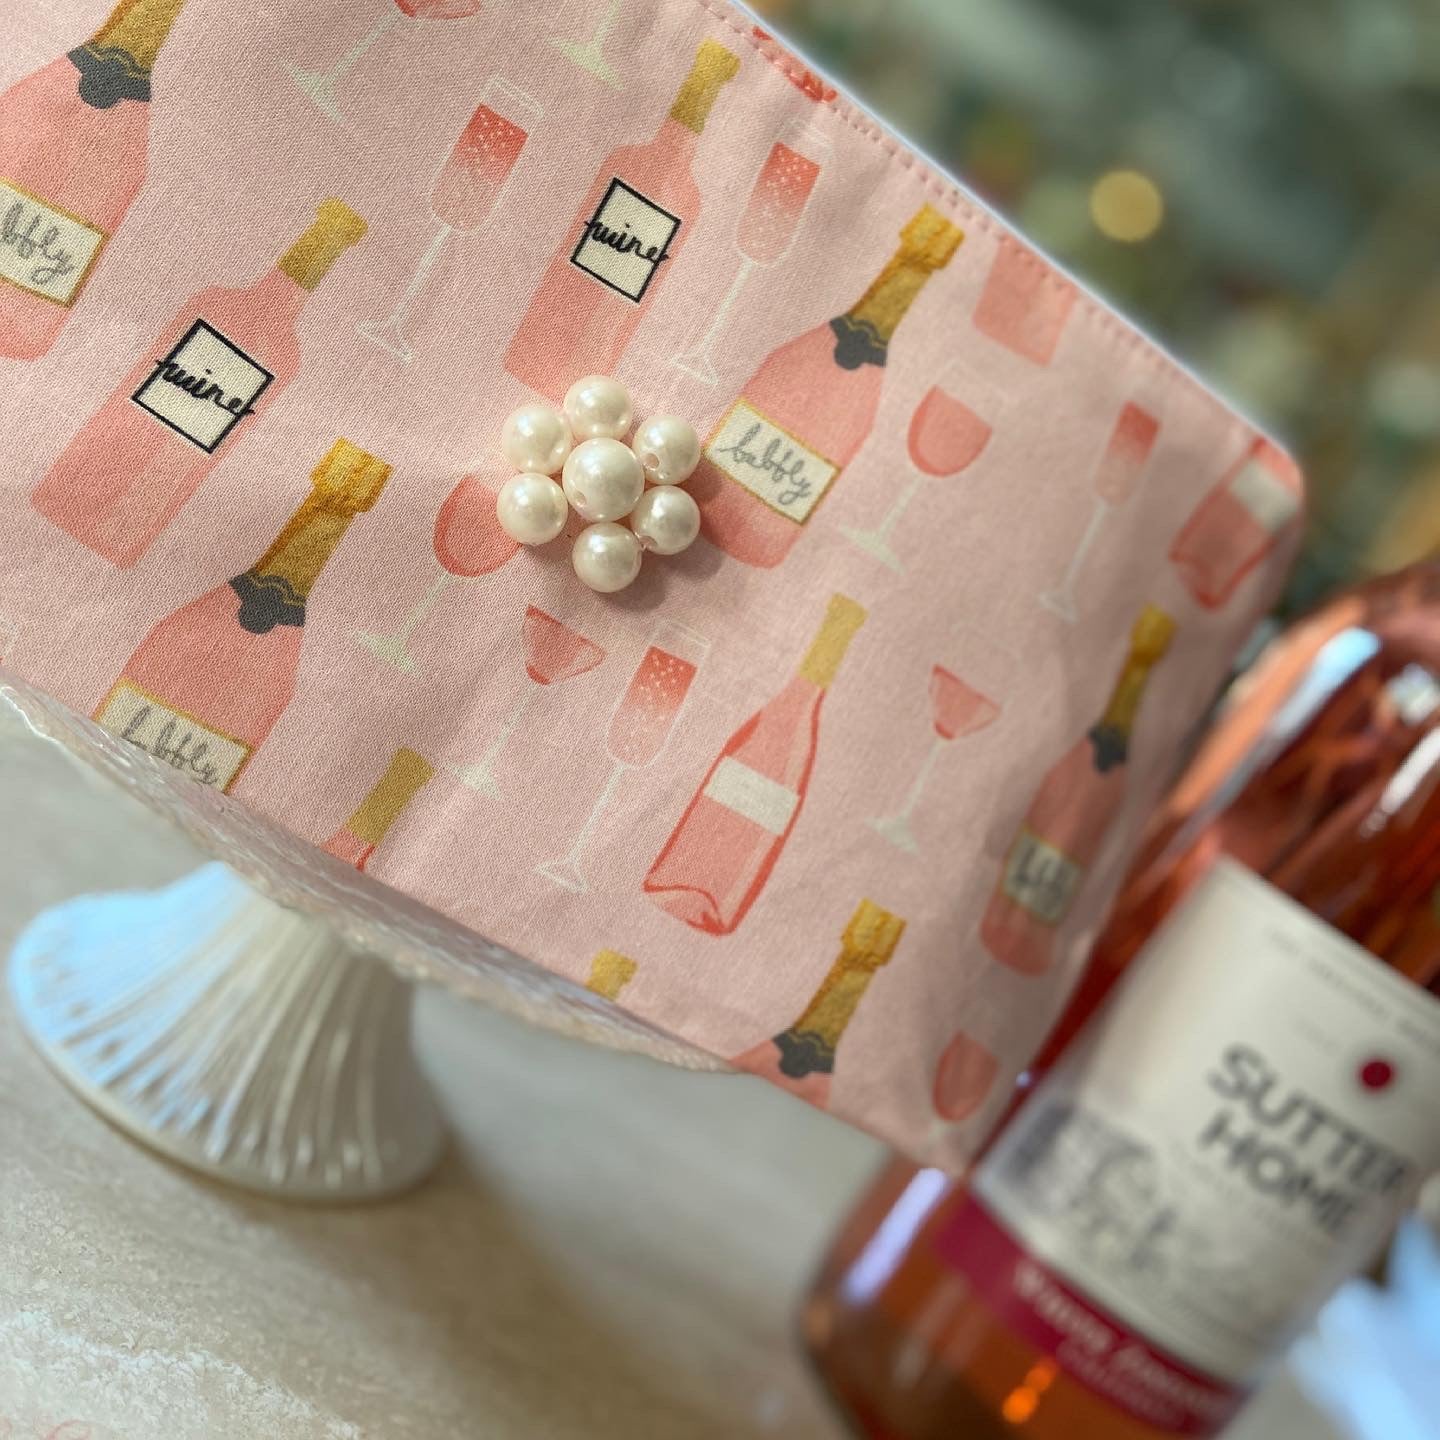 Pink wine/champagne cosmetic bag